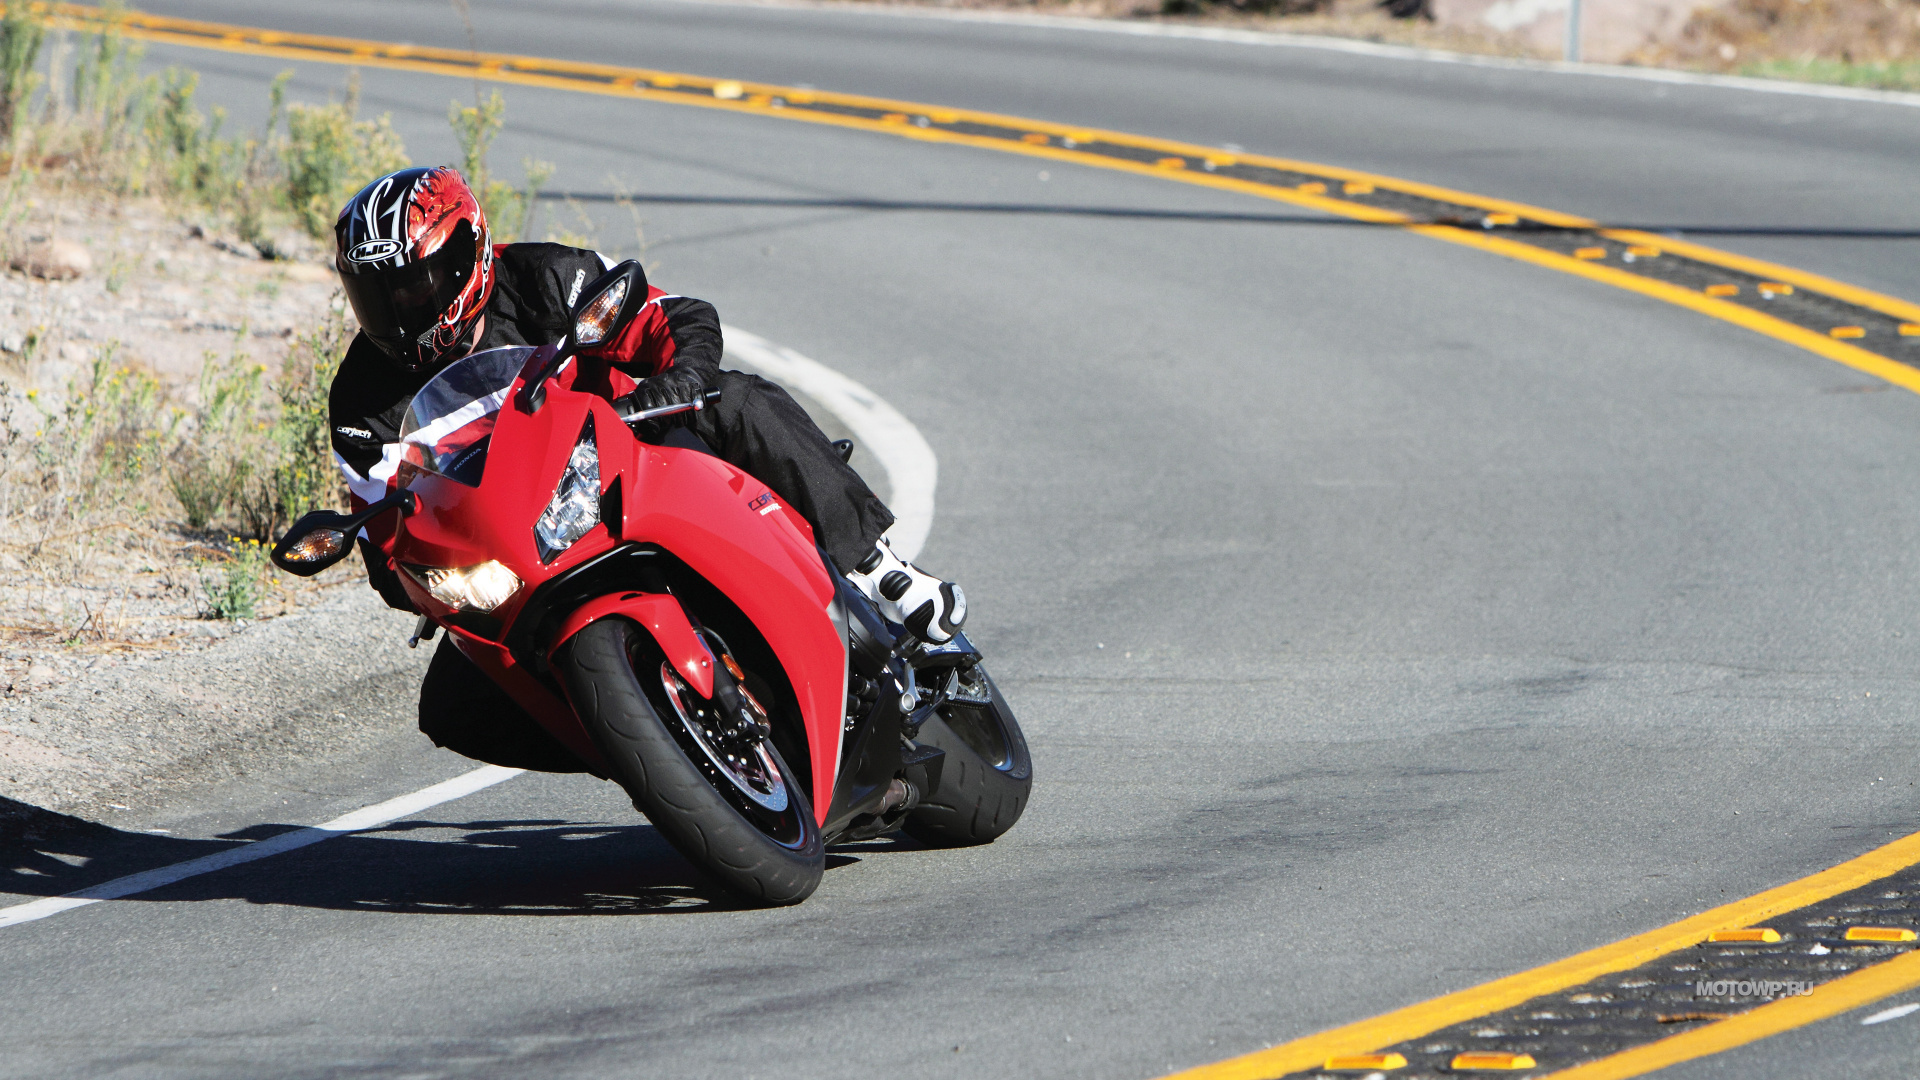 Man in Red and Black Sports Shirt Riding Red Sports Bike on Road During Daytime. Wallpaper in 1920x1080 Resolution